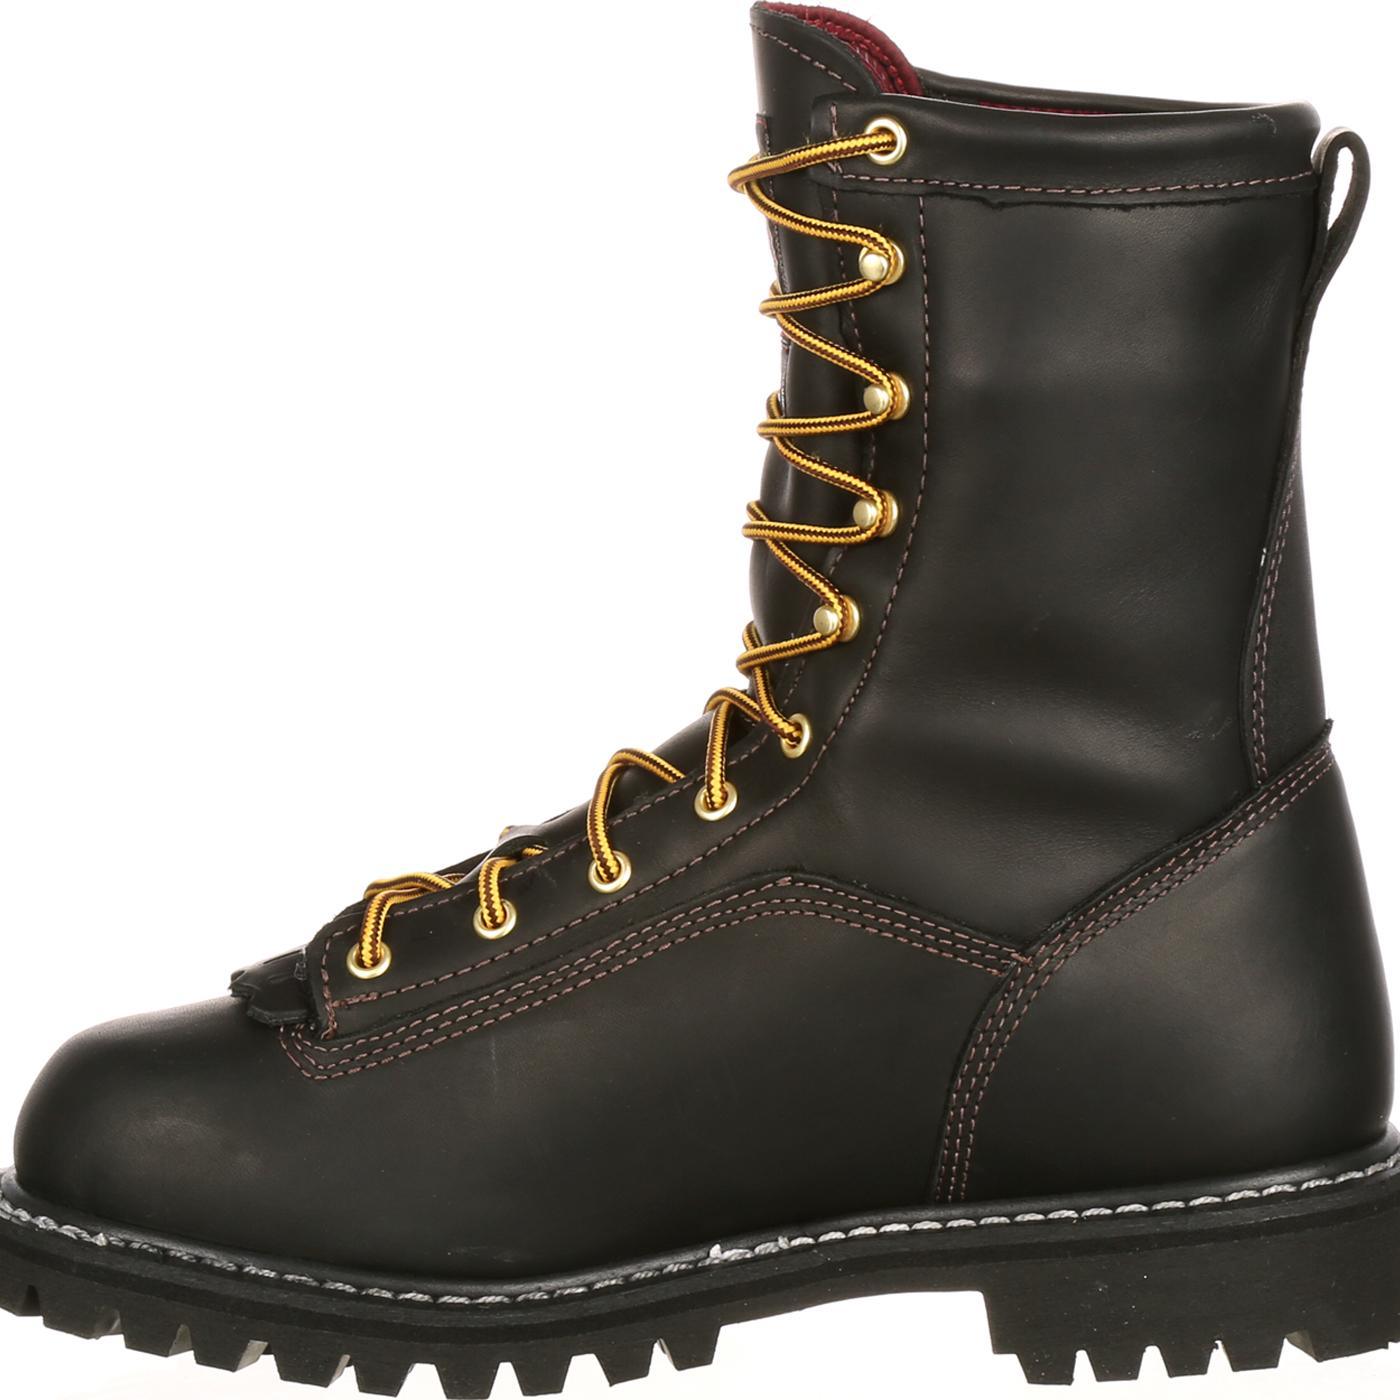 Georgia Boot Lace-to-Toe GORE-TEX® Waterproof 200G Insulated Work Boot - Flyclothing LLC